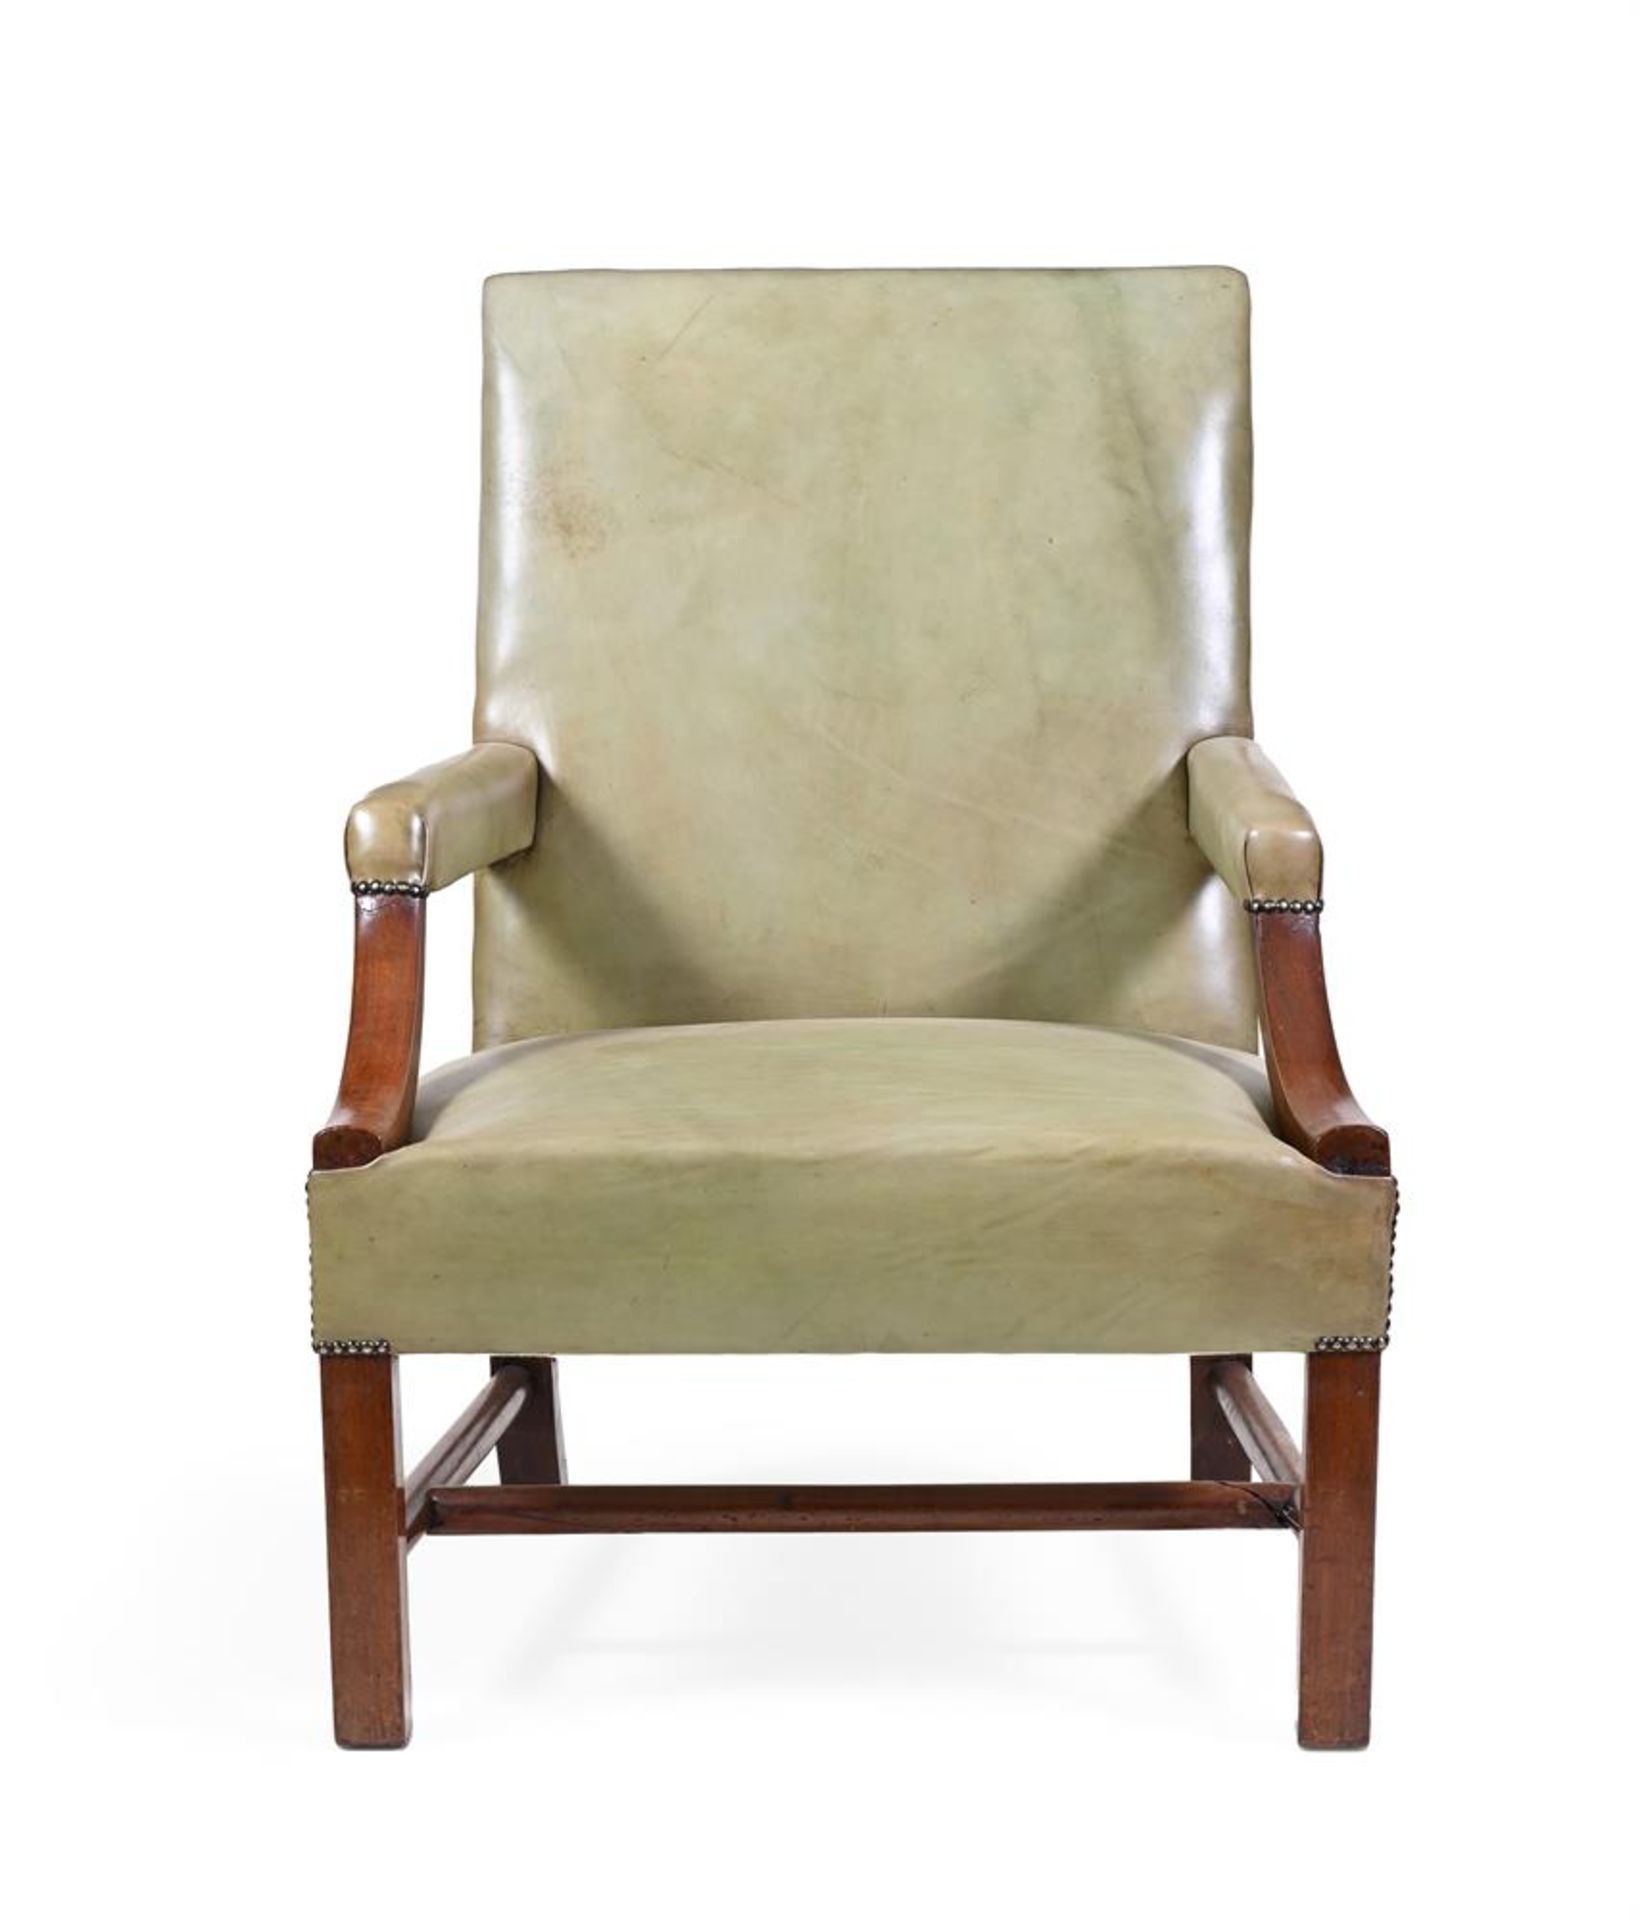 A GEORGE II WALNUT, MAHOGANY AND LEATHER UPHOLSTERED 'GAINSBOROUGH' ARMCHAIR, LATE 18TH CENTURY - Image 2 of 2